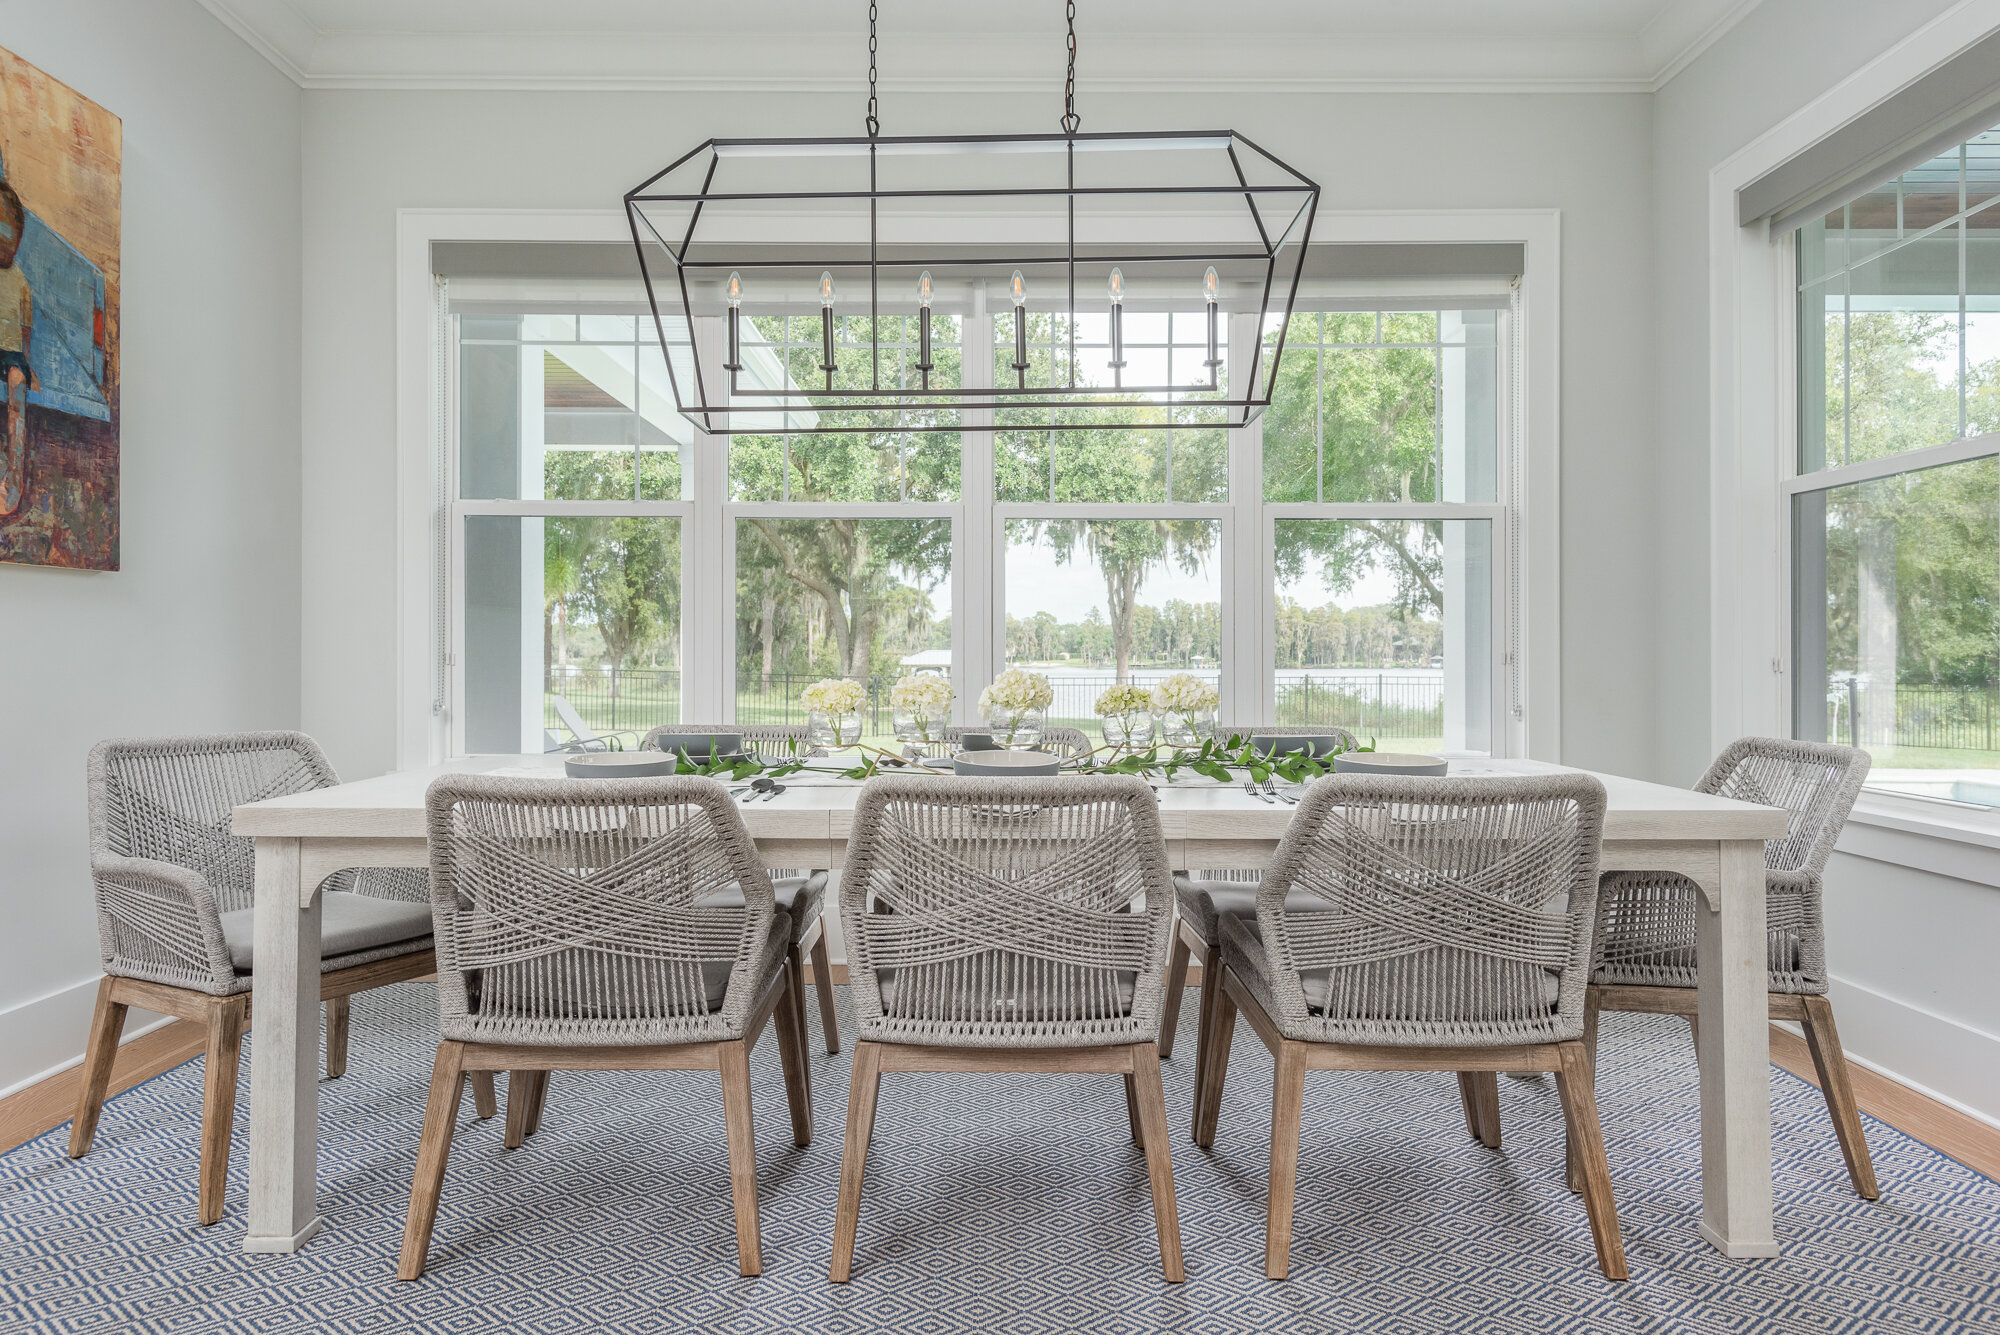 Light brown woven chairs for dining room with black metal chandelier